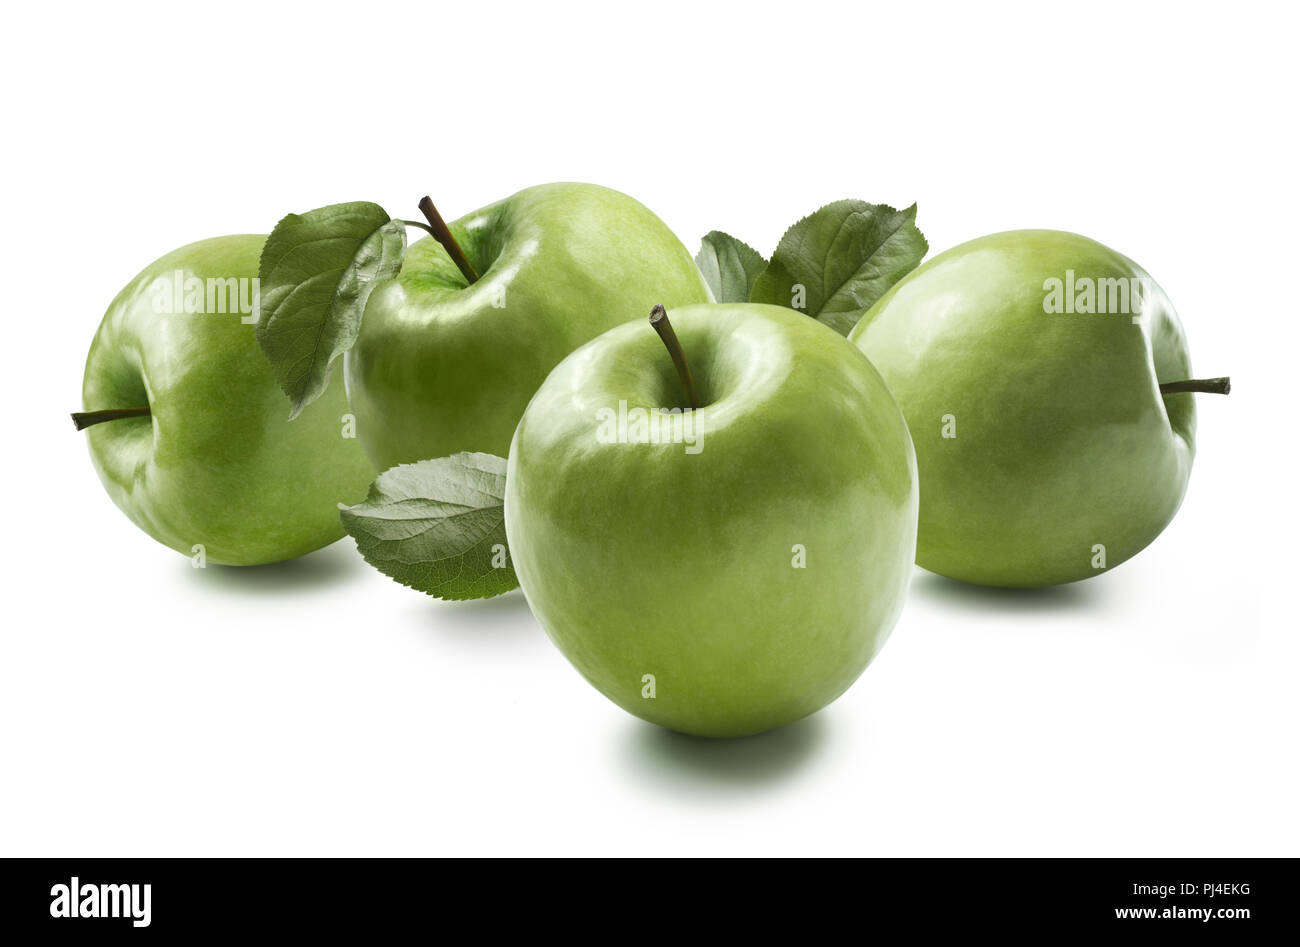 Green cooking apples Granny Smith isolated on white background horizontal Stock Photo